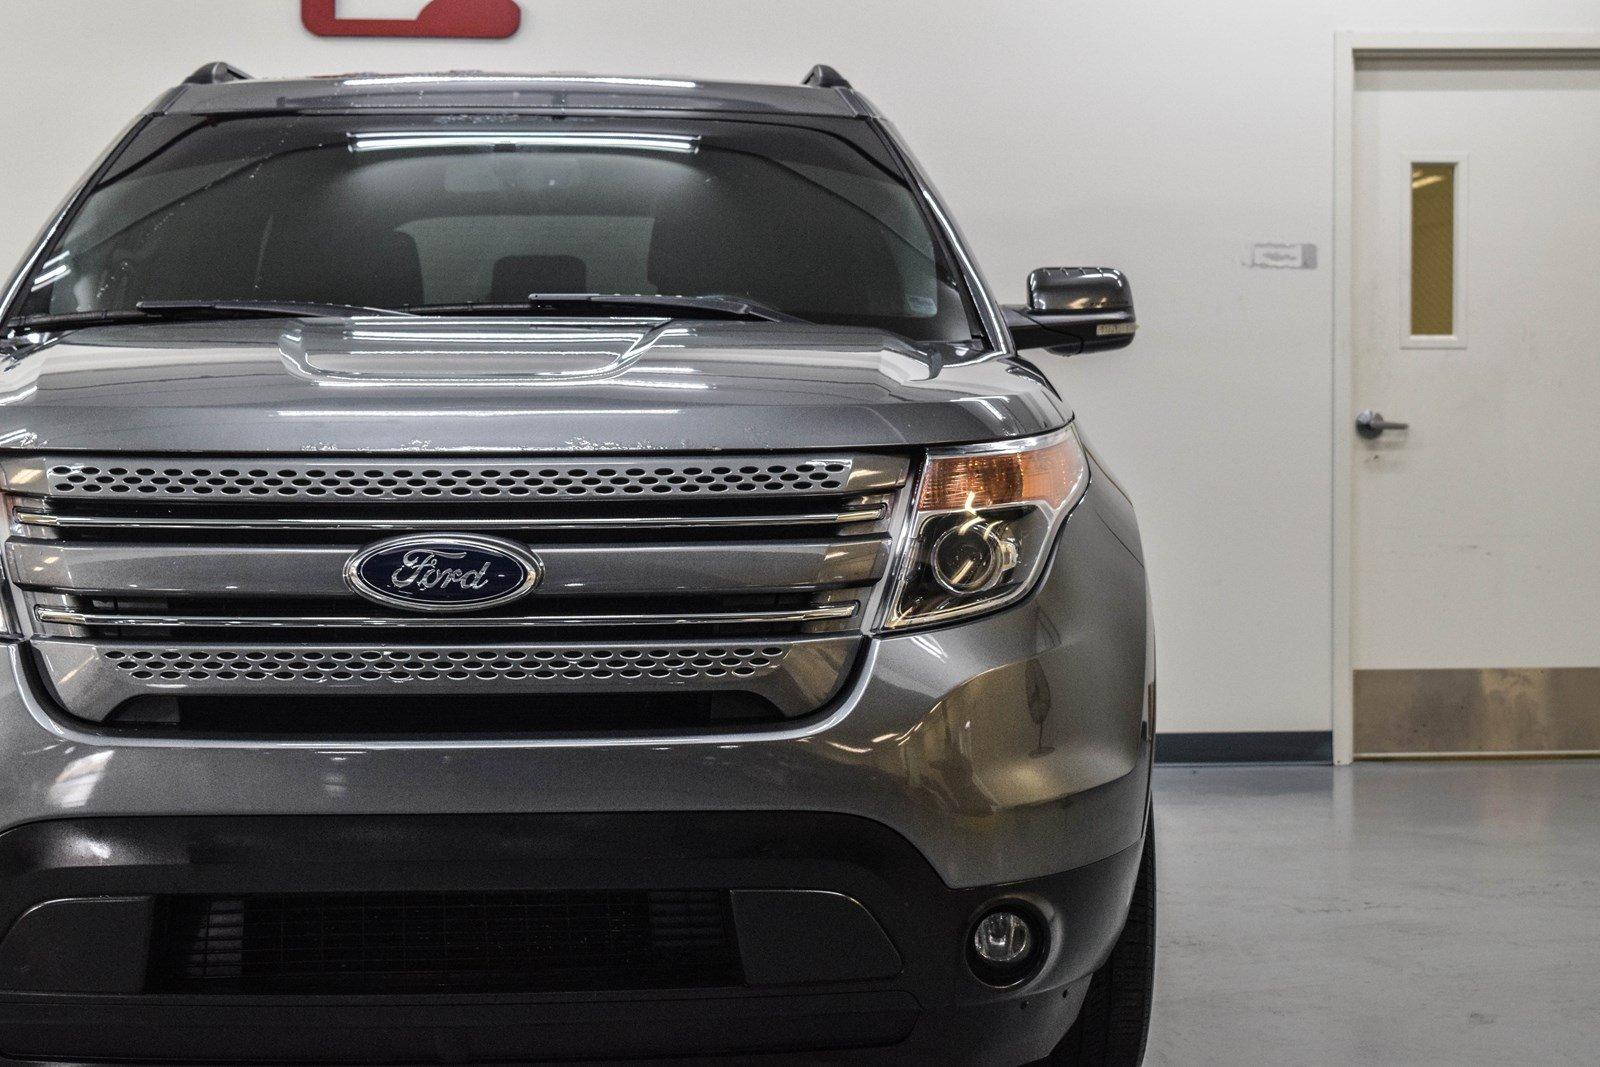 Used 2013 Ford Explorer Limited for sale Sold at Gravity Autos Marietta in Marietta GA 30060 5